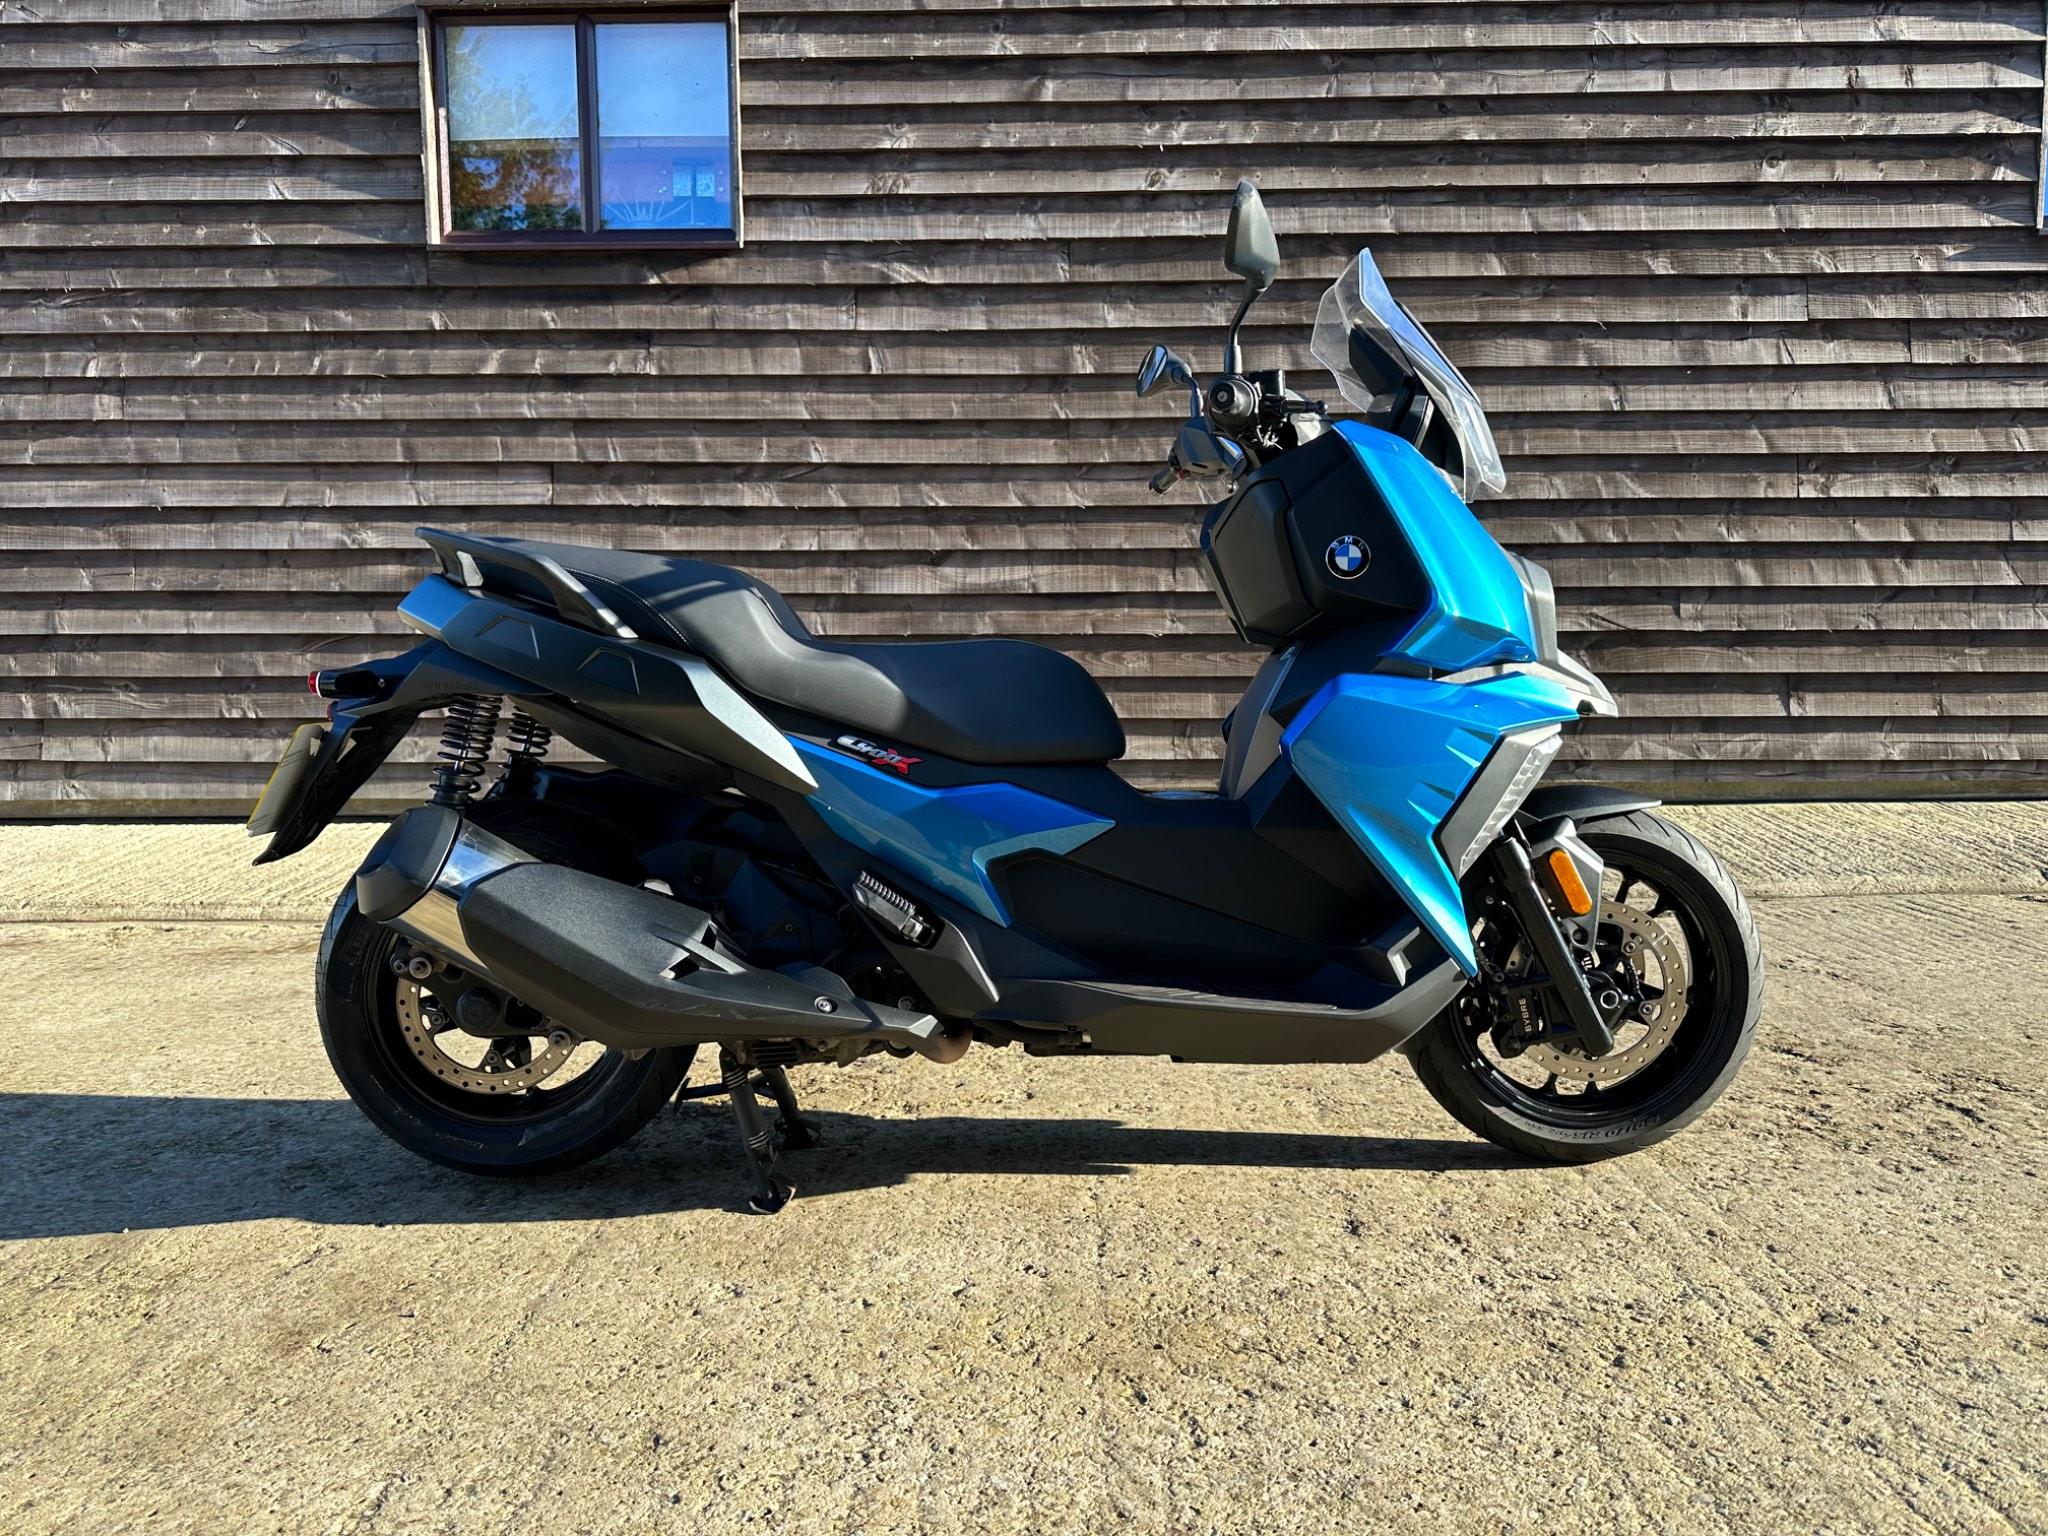 2020 BMW C400 400 X SE ABS From £69.83 per month 